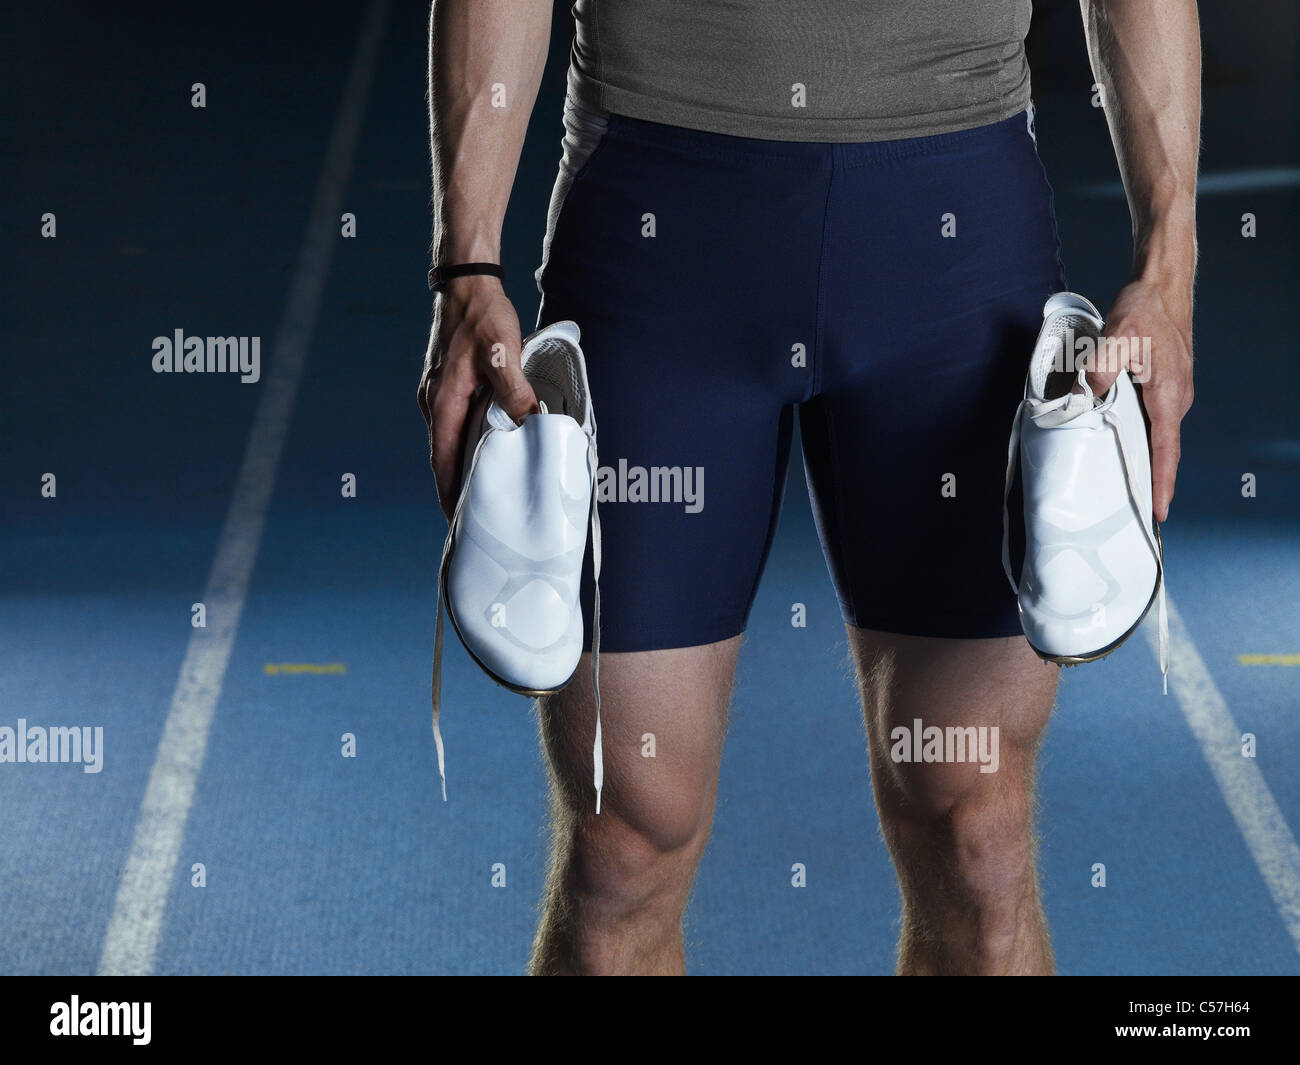 Man carrying running shoes on track Stock Photo